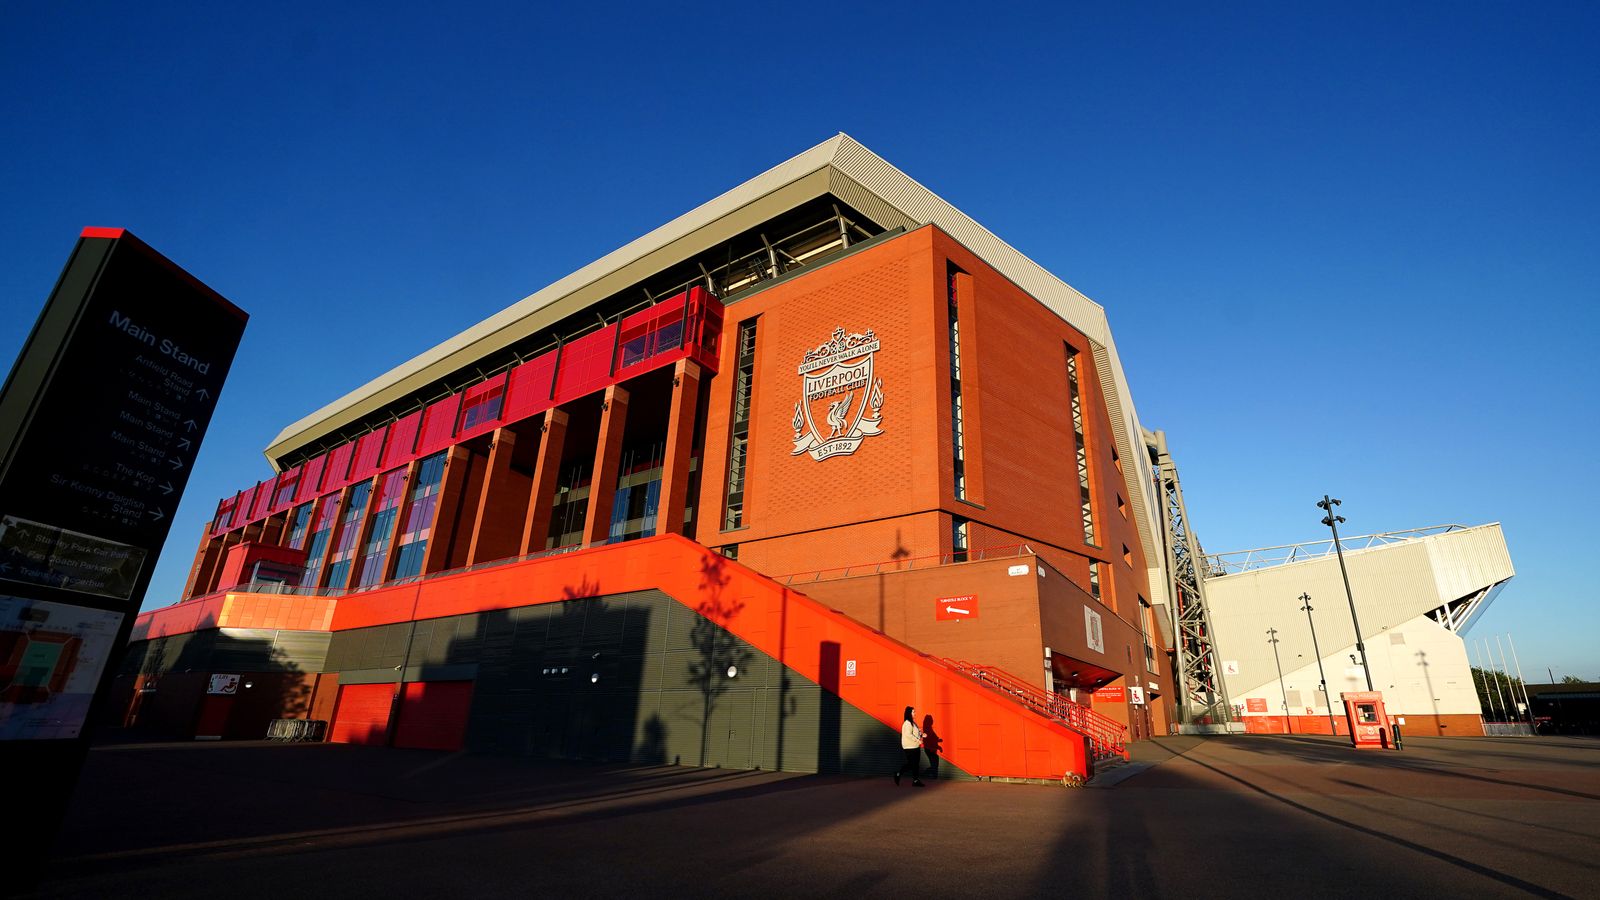 Liverpool owners Fenway Sports Group say they are open to offers, raising  prospect of club being sold, UK News